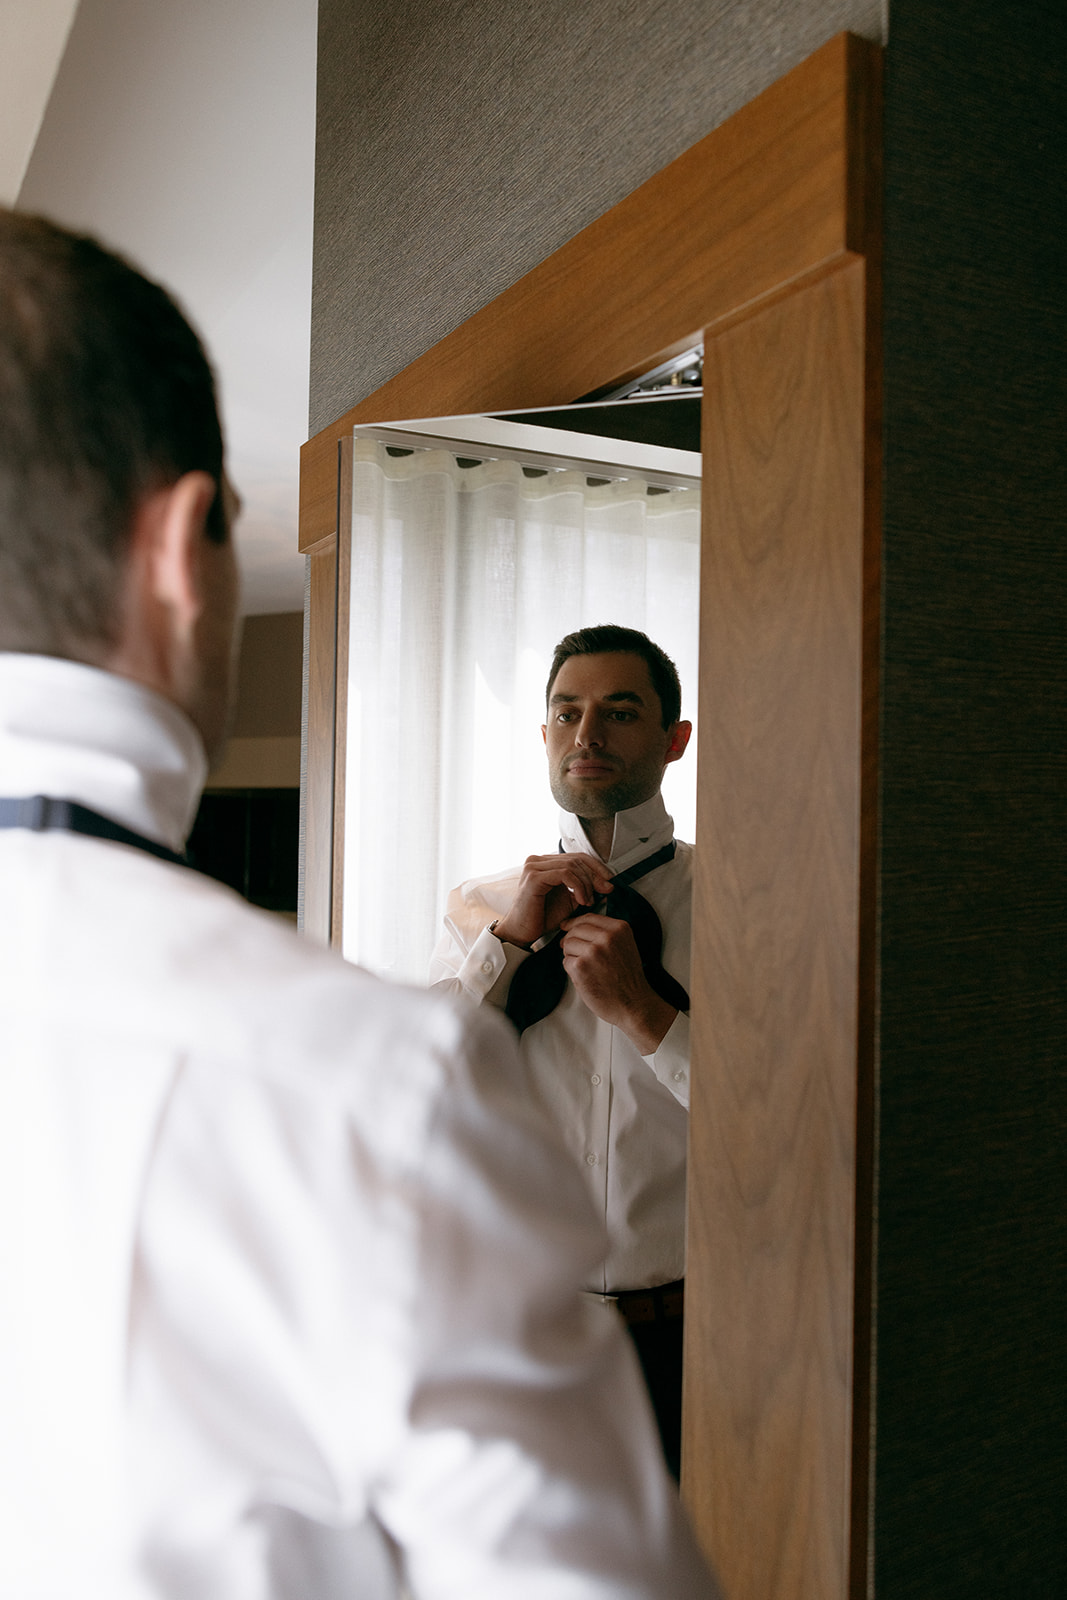 A groom gets ready for his wedding day at The Roxy